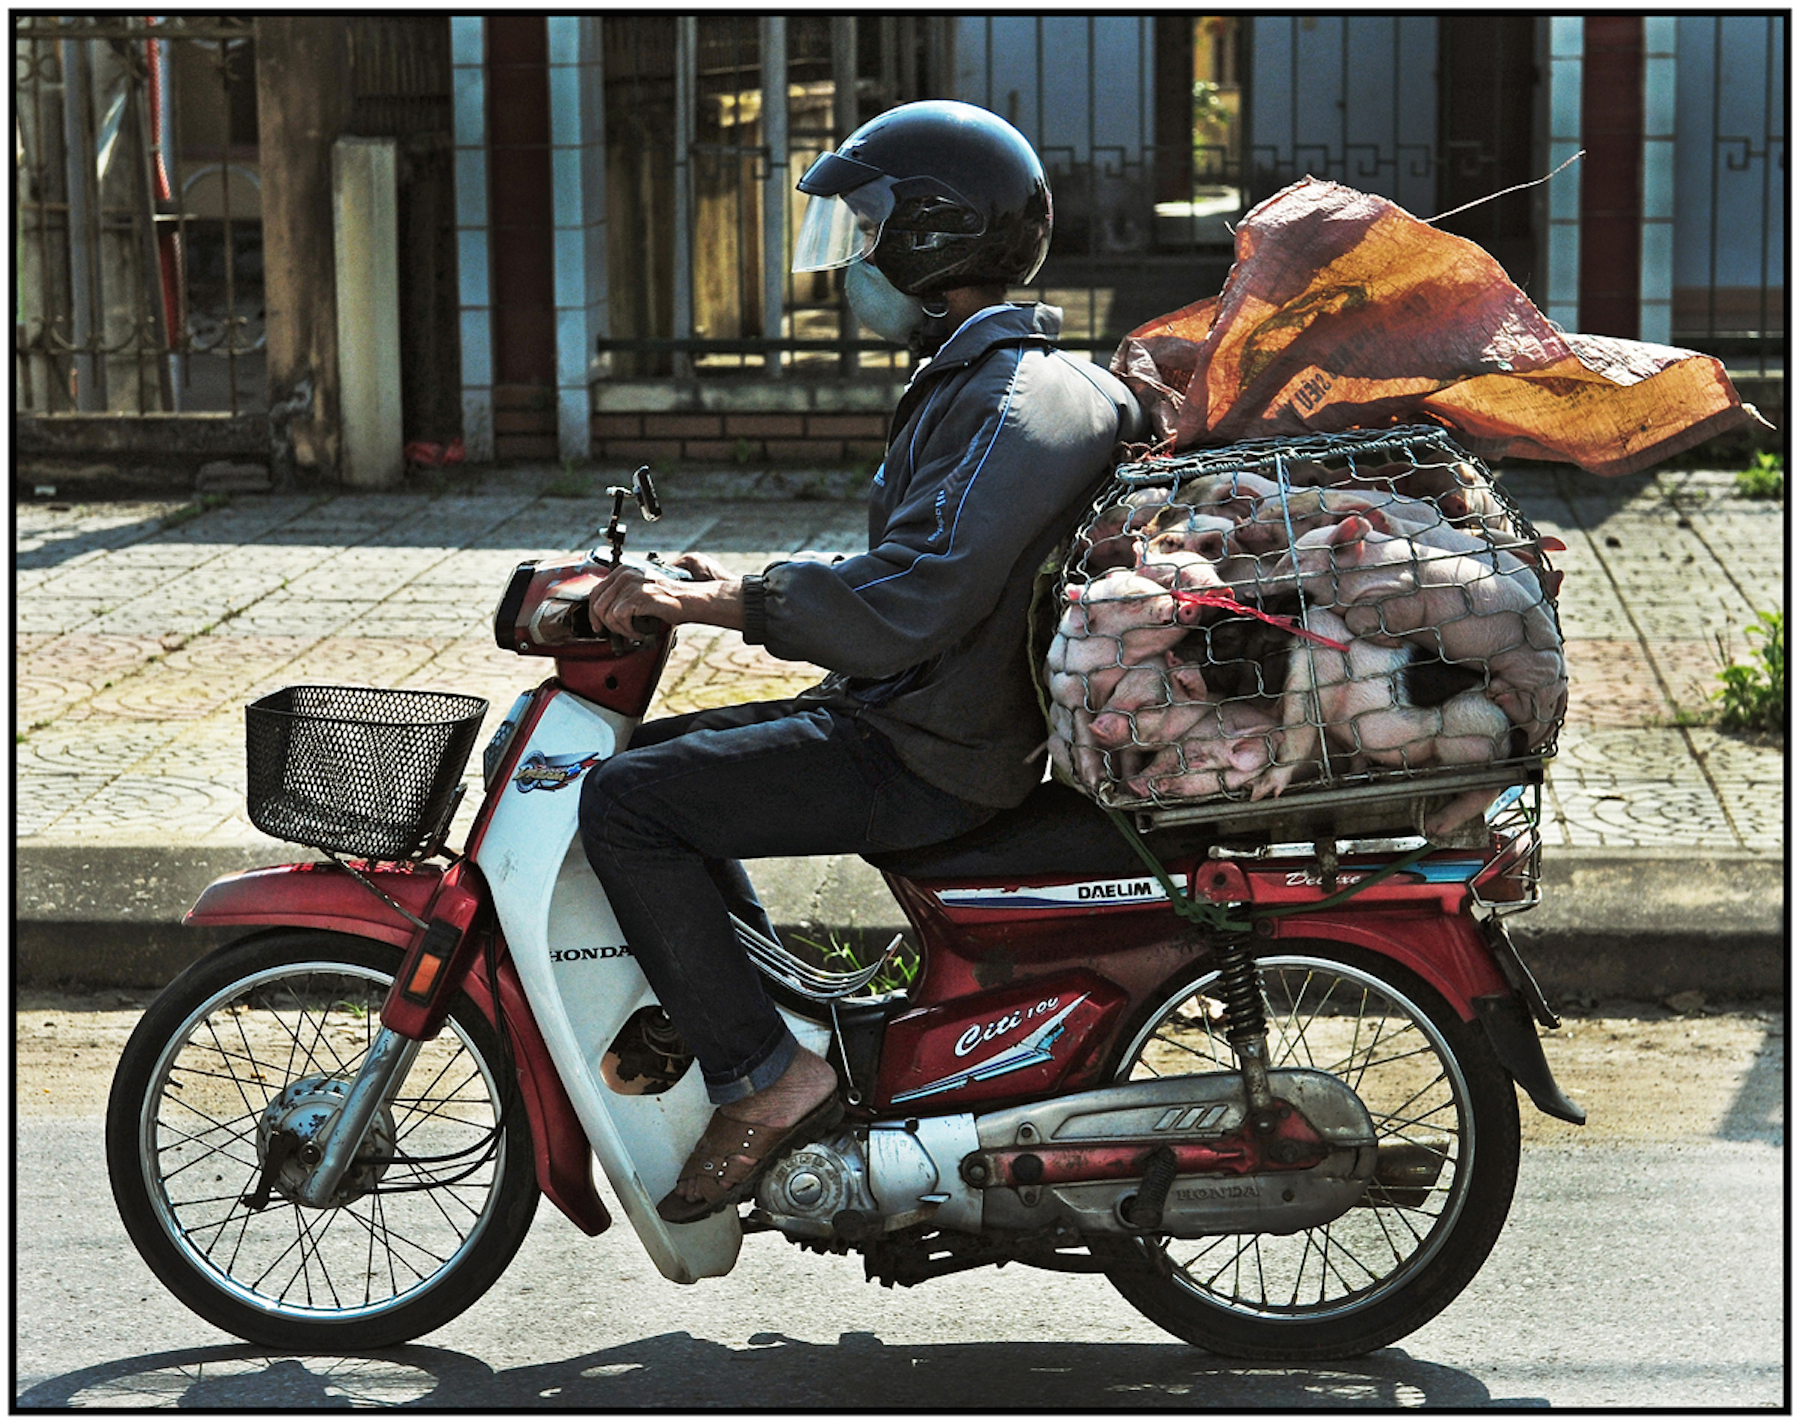  Piglets to market, Route 1, north of Hue, Vietnam, March 2015. #7256 